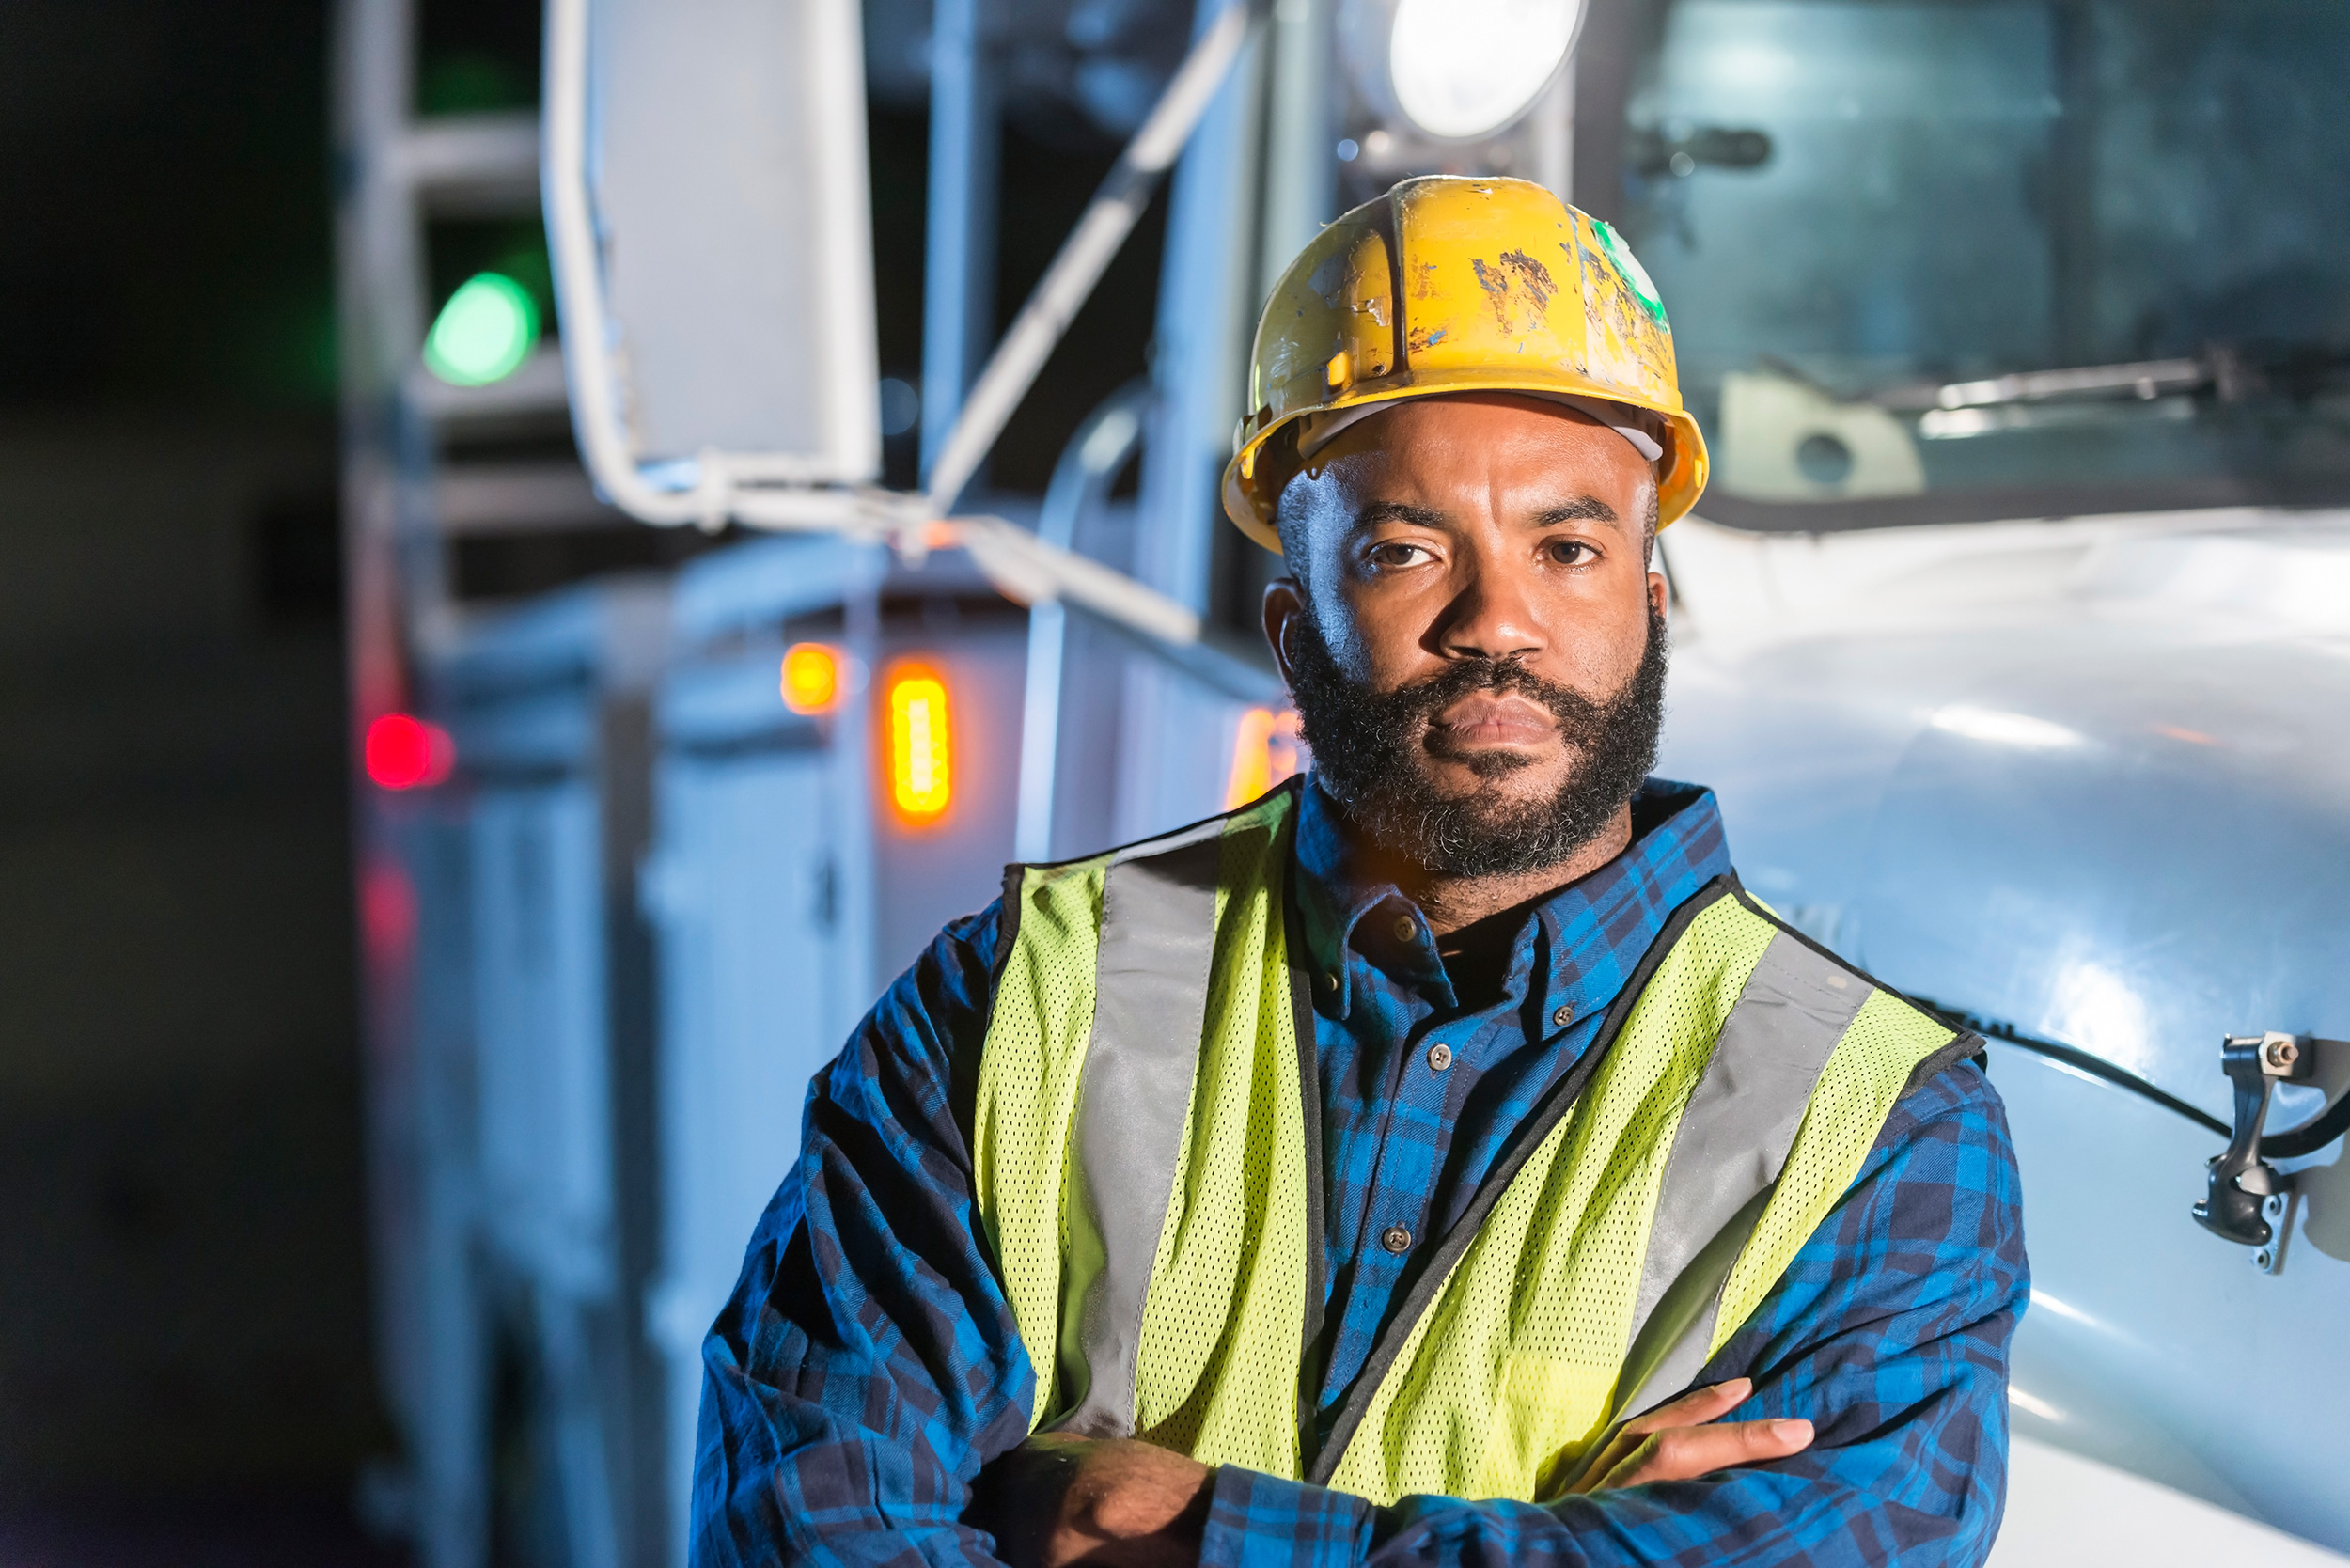 Folding his arms and wearing a safety vest and helmet, a man stands in front of a work truck at night. If you're able to work enough to equal what Social Security calls "substantial gainful activity," you may be denied disability benefits.